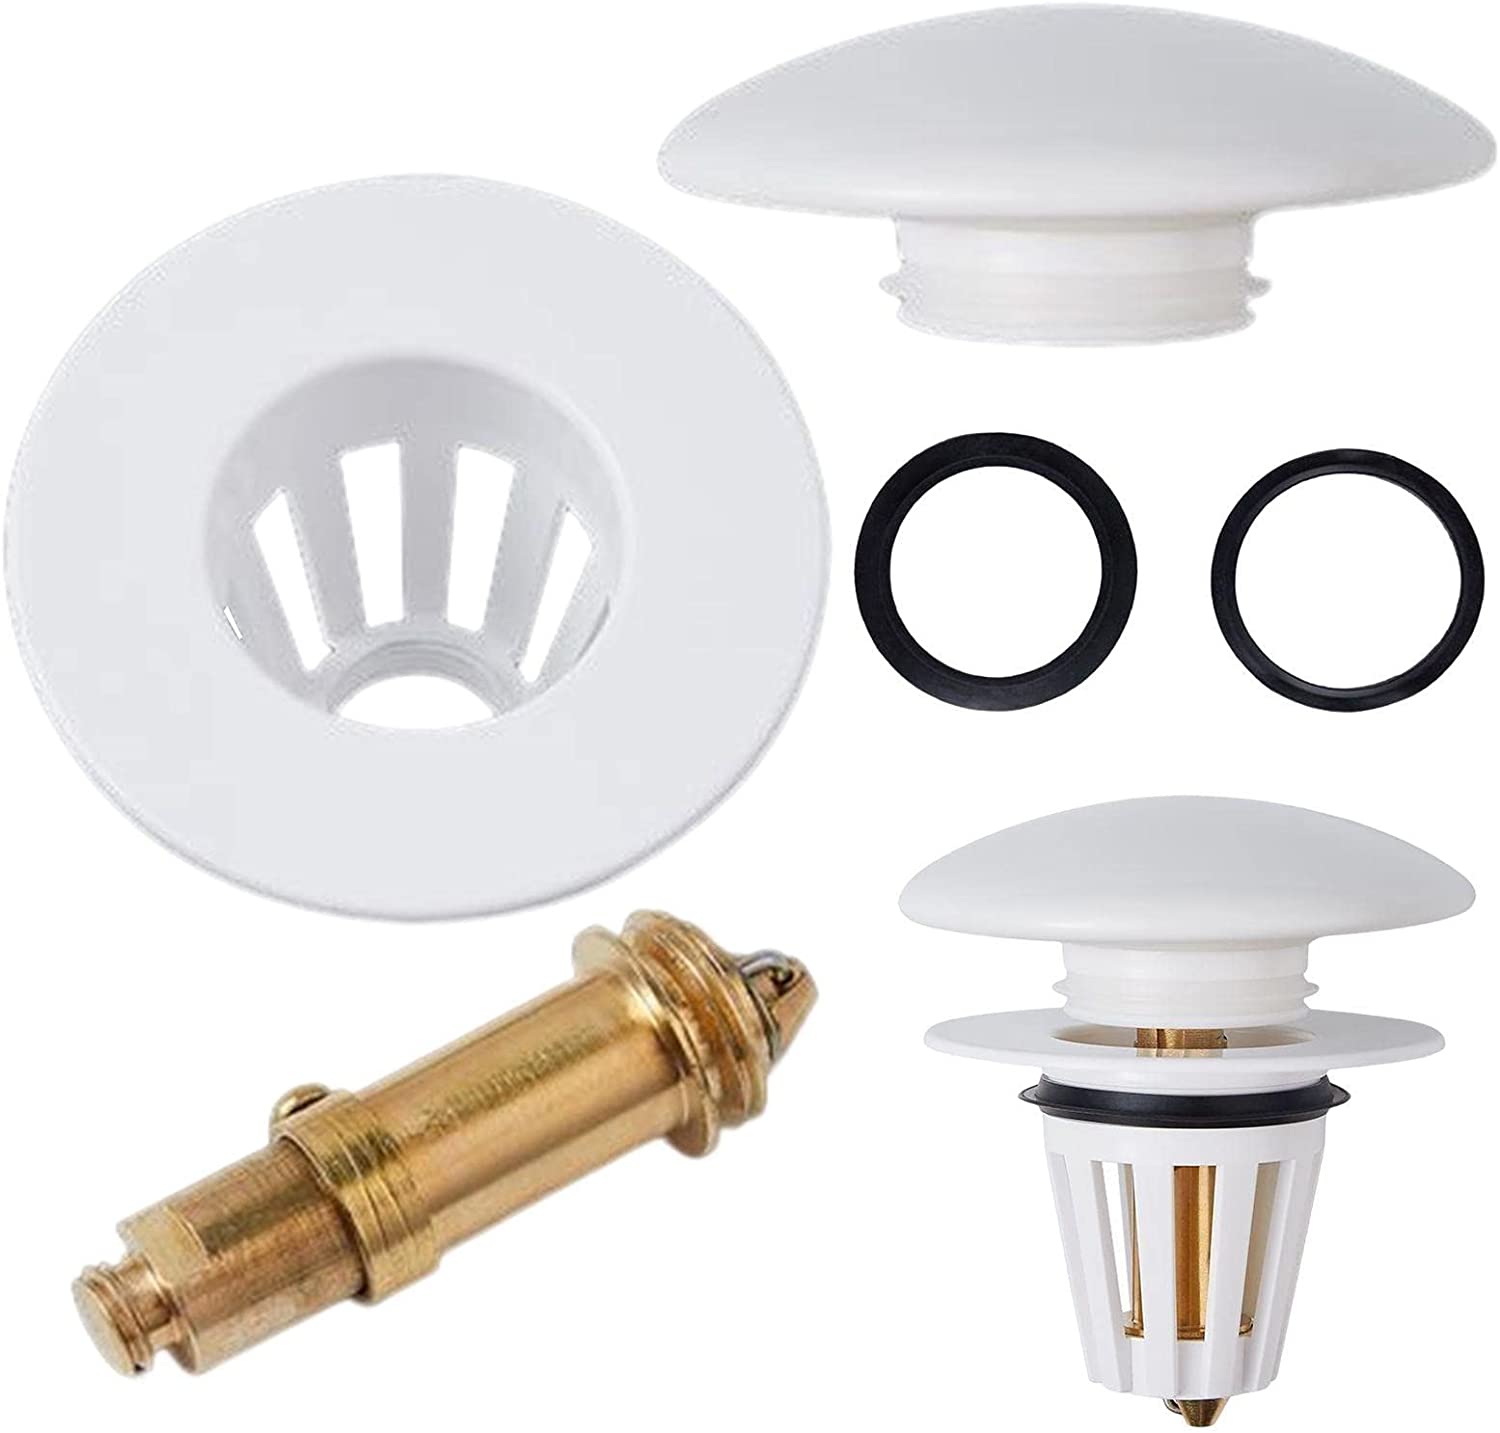 Different parts of the Bathroom Sink Stopper Drain Filter with Hair Catcher